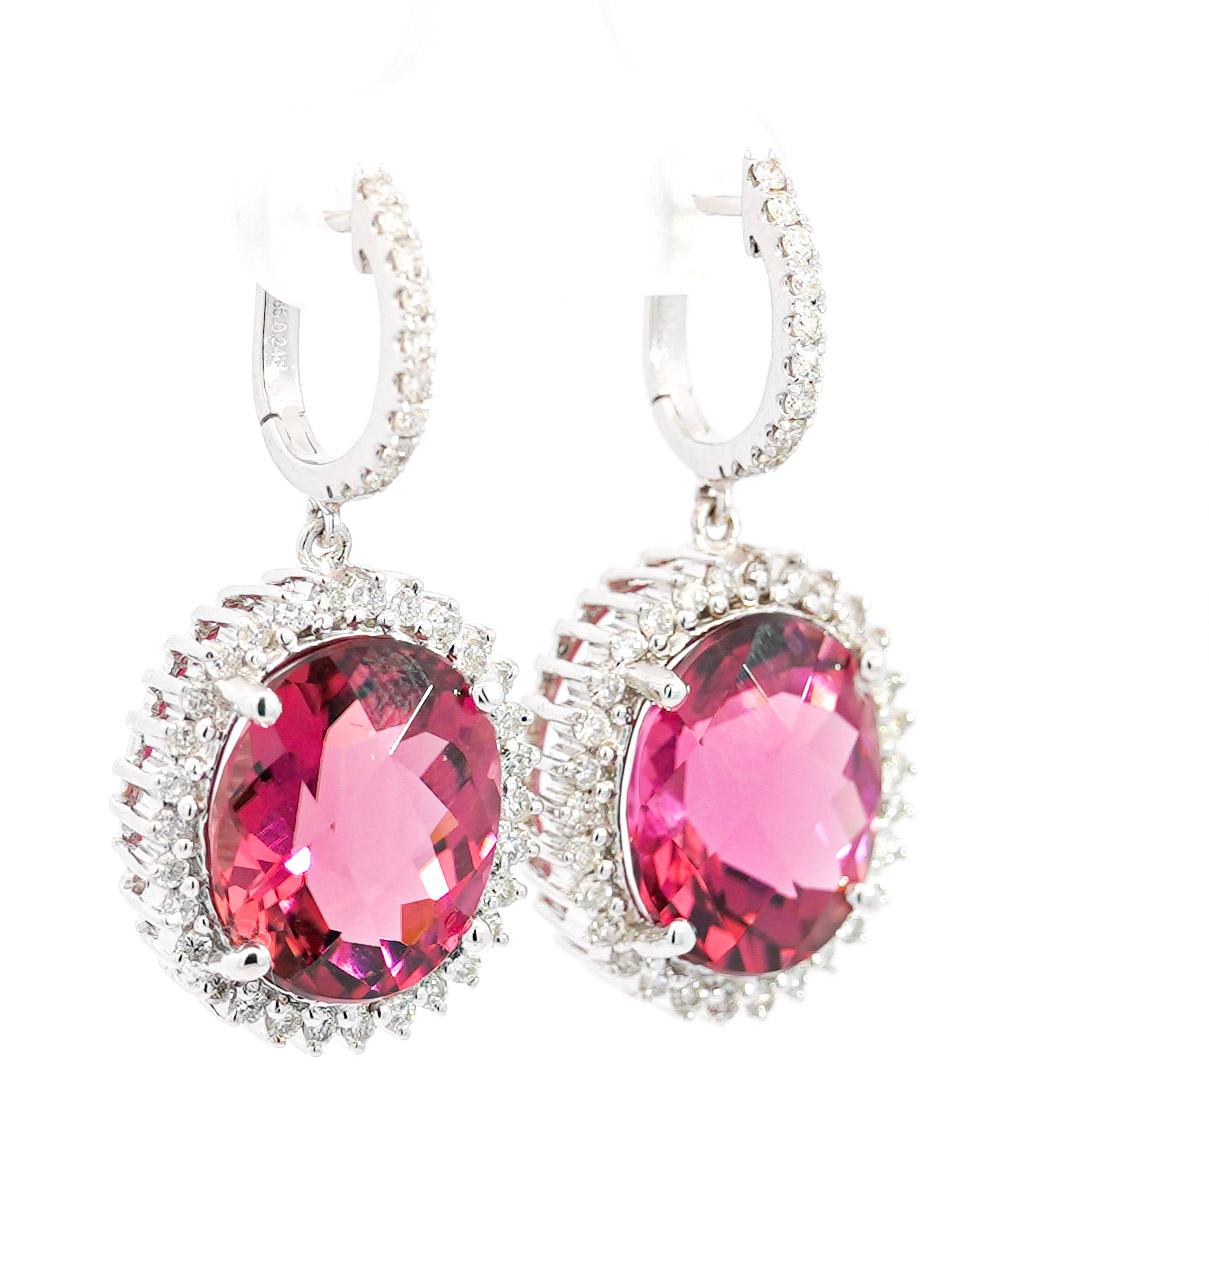 These 18K white gold earrings, weighing a total of 9.24 grams, showcase a dazzling combination of approximately 16 carats of tourmaline and diamonds. Each earring features a checkerboard oval-cut Pink tourmaline, 8.16 carats and 7.78 carats,